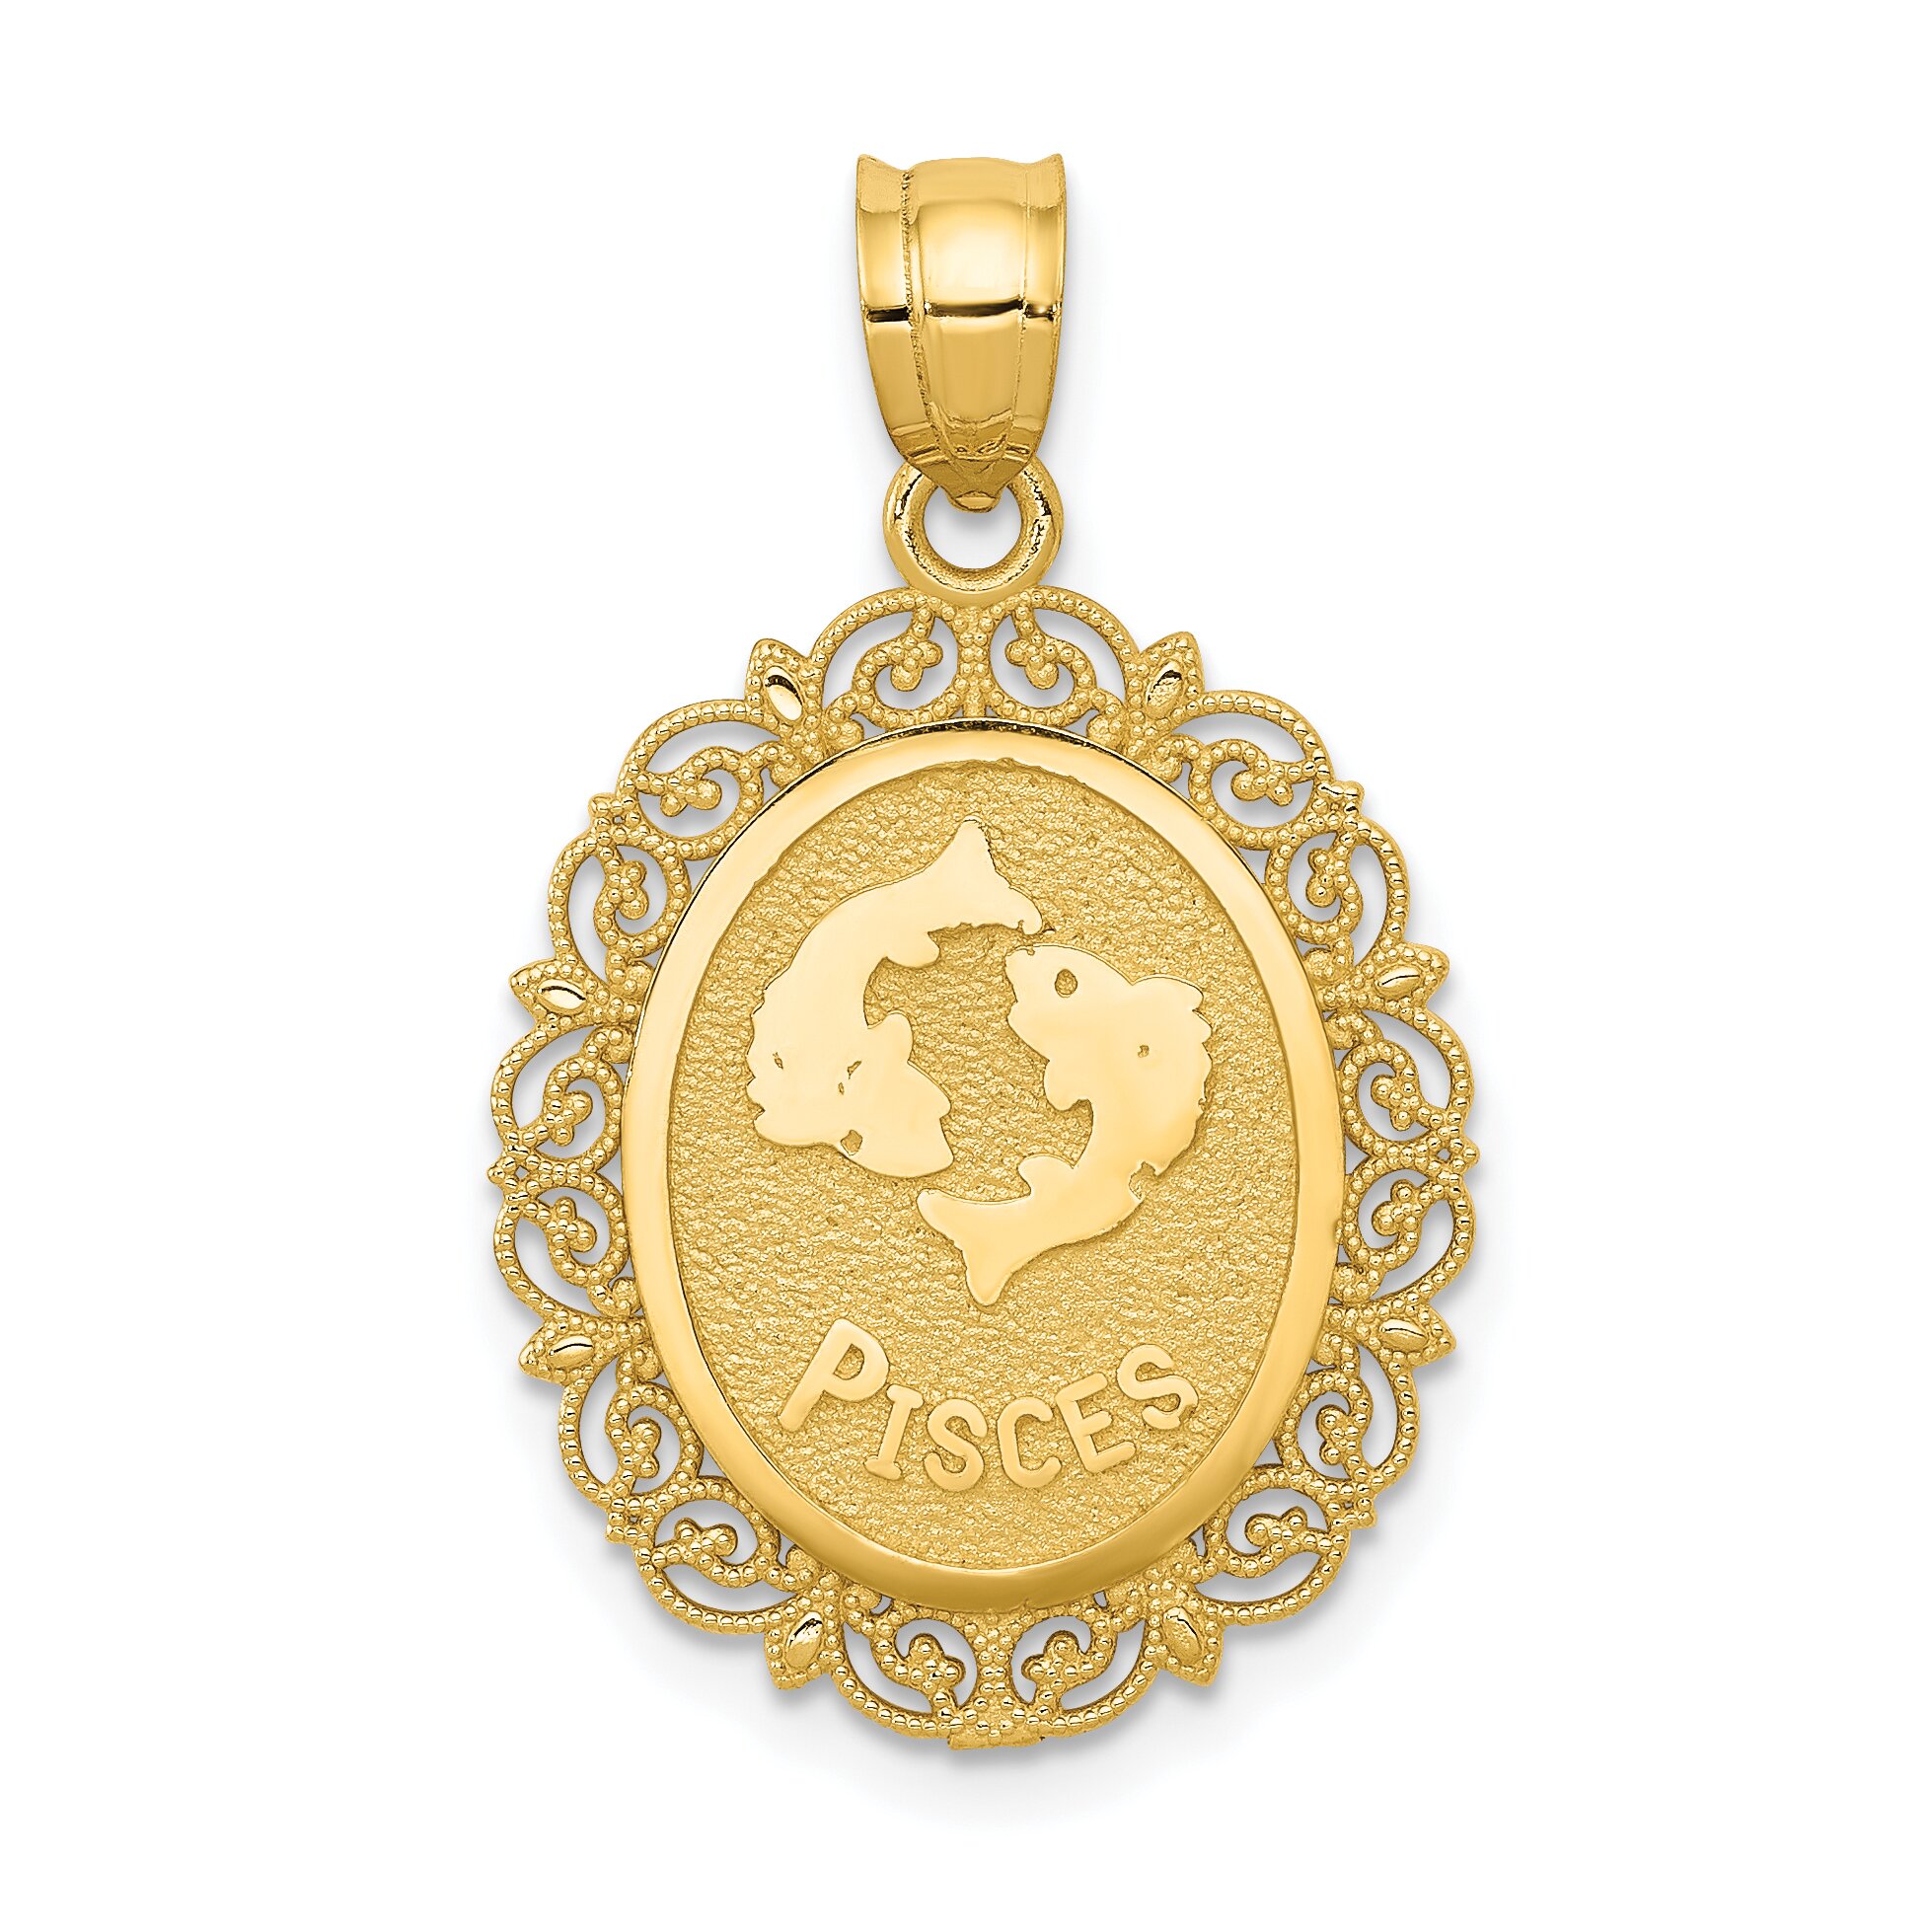 Findingking 14K Gold Pisces Zodiac Oval Charm